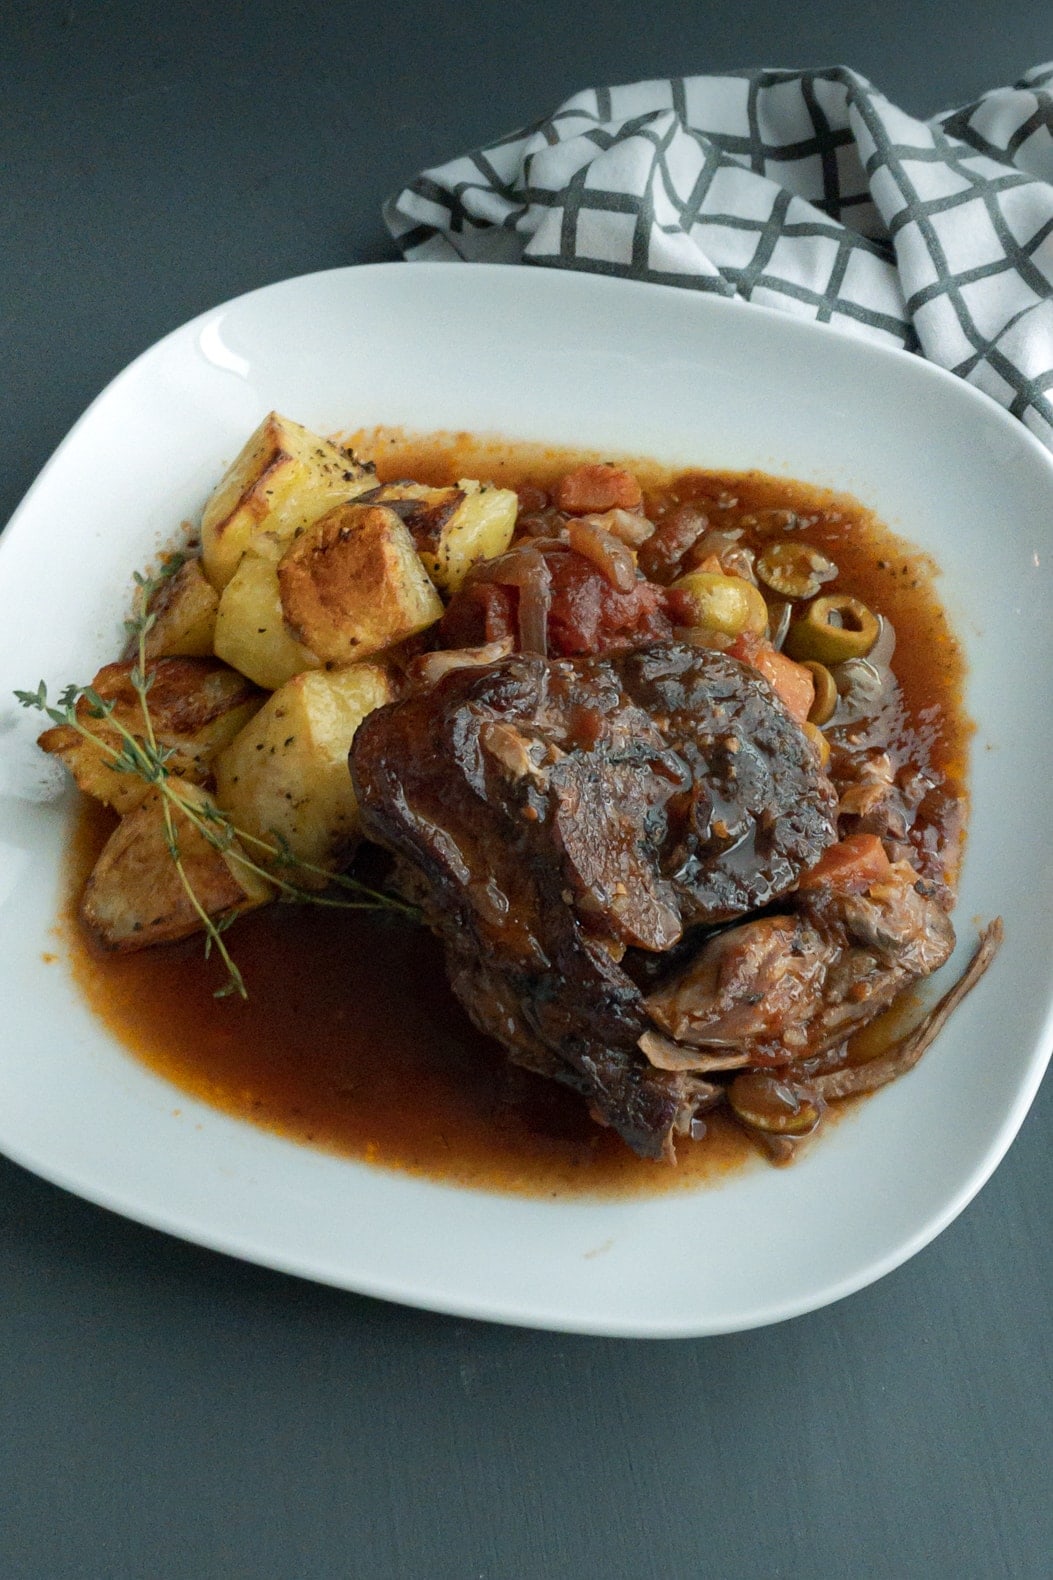 Roasted piece of lamb leg on vegetables in a red wine tomato sauce, served with roasted potatoes